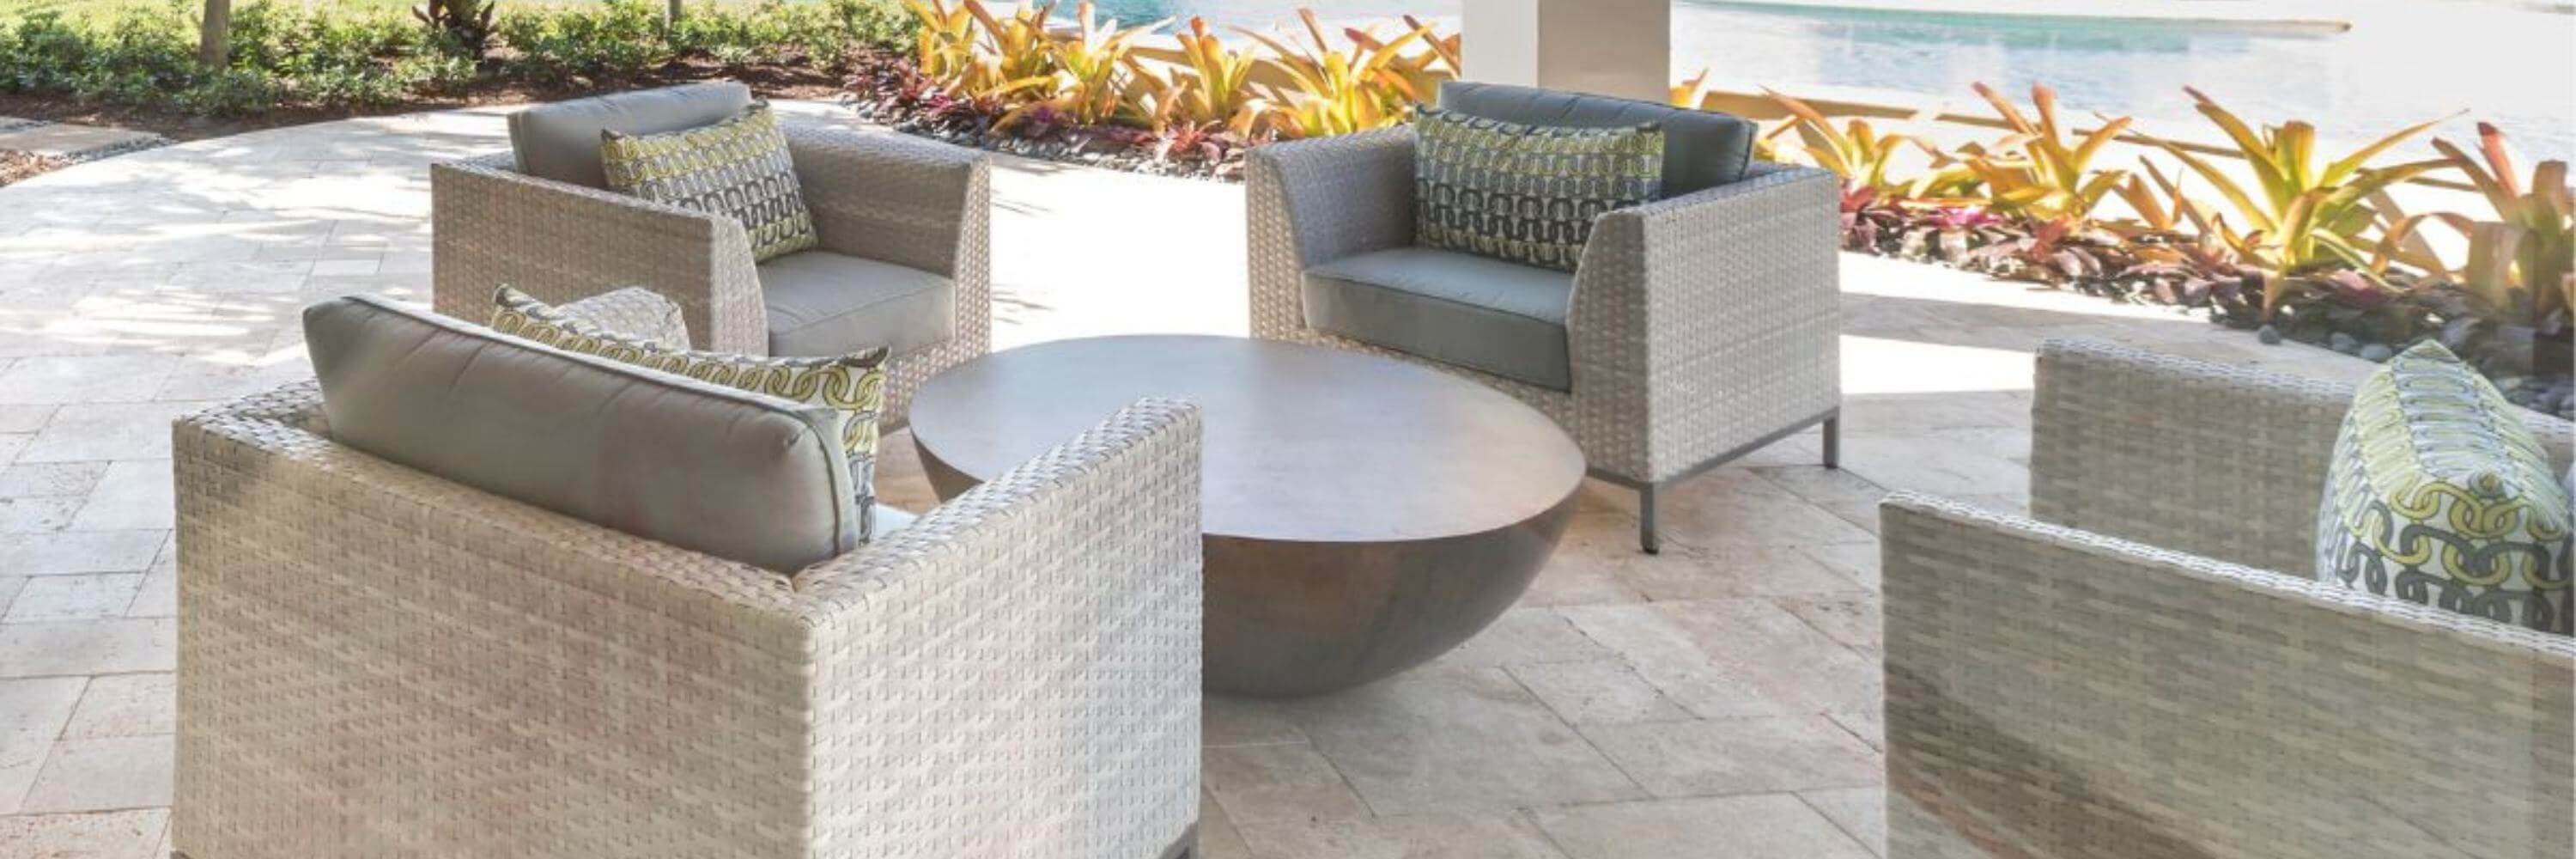 Gray patio furniture with round table